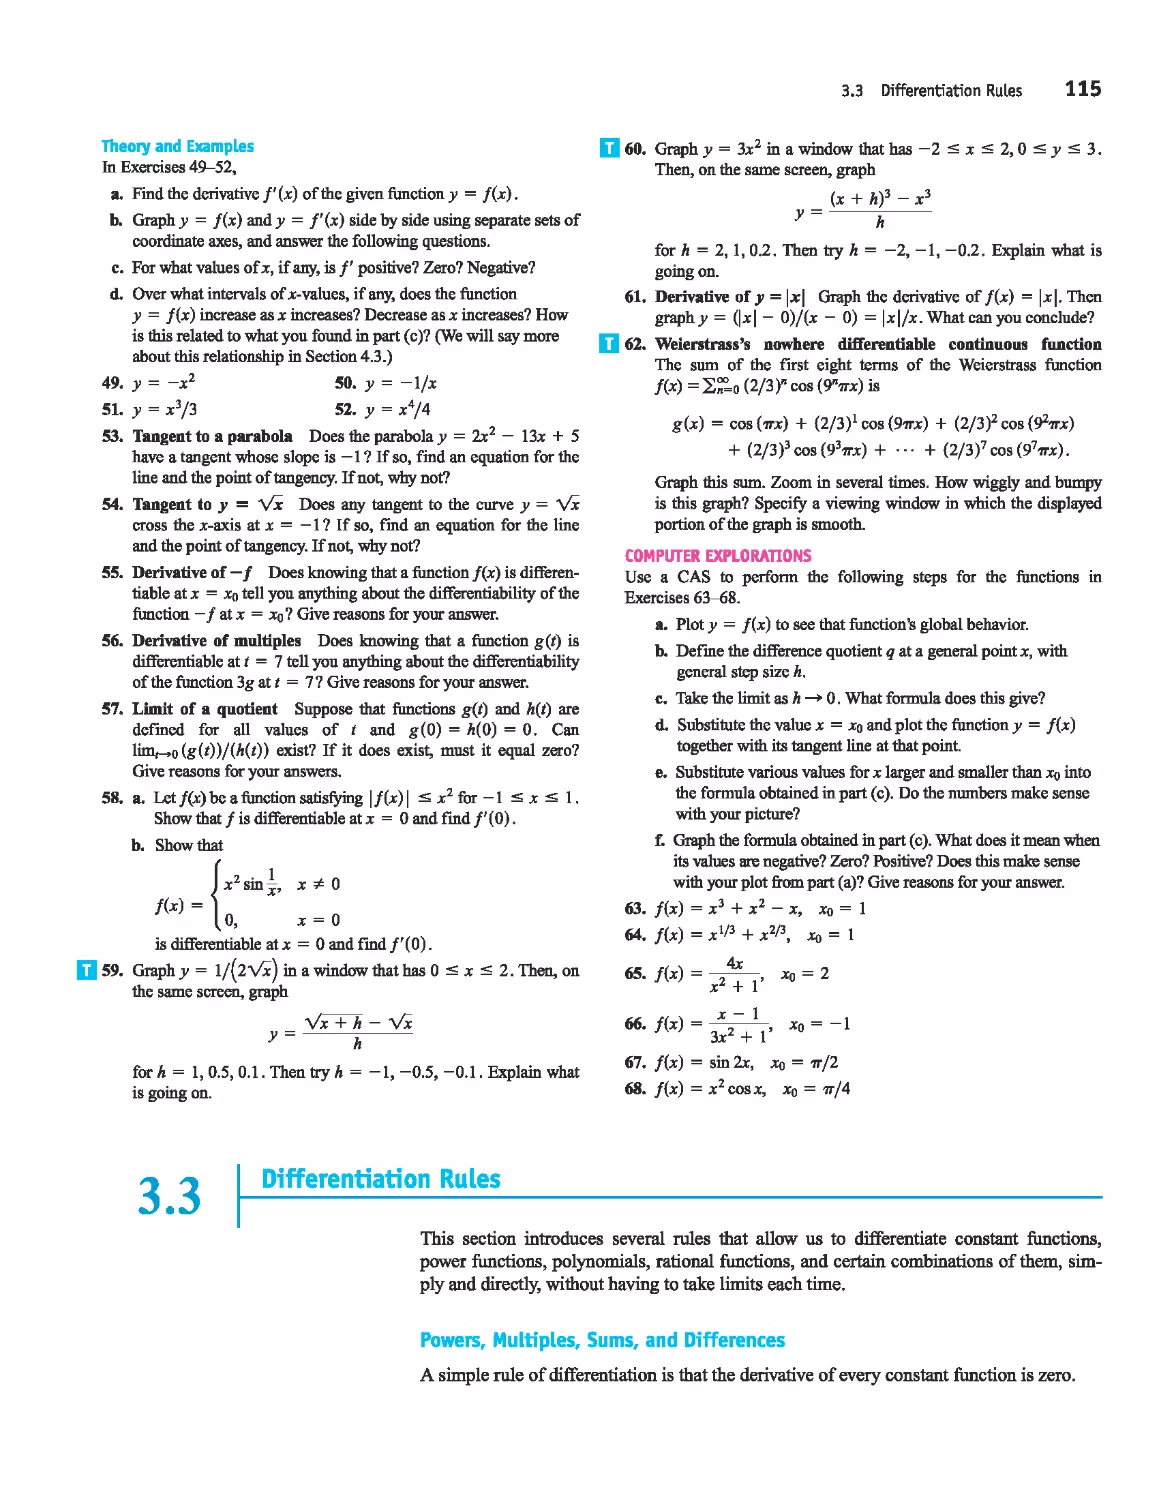 3.3 - Differentiation Rules